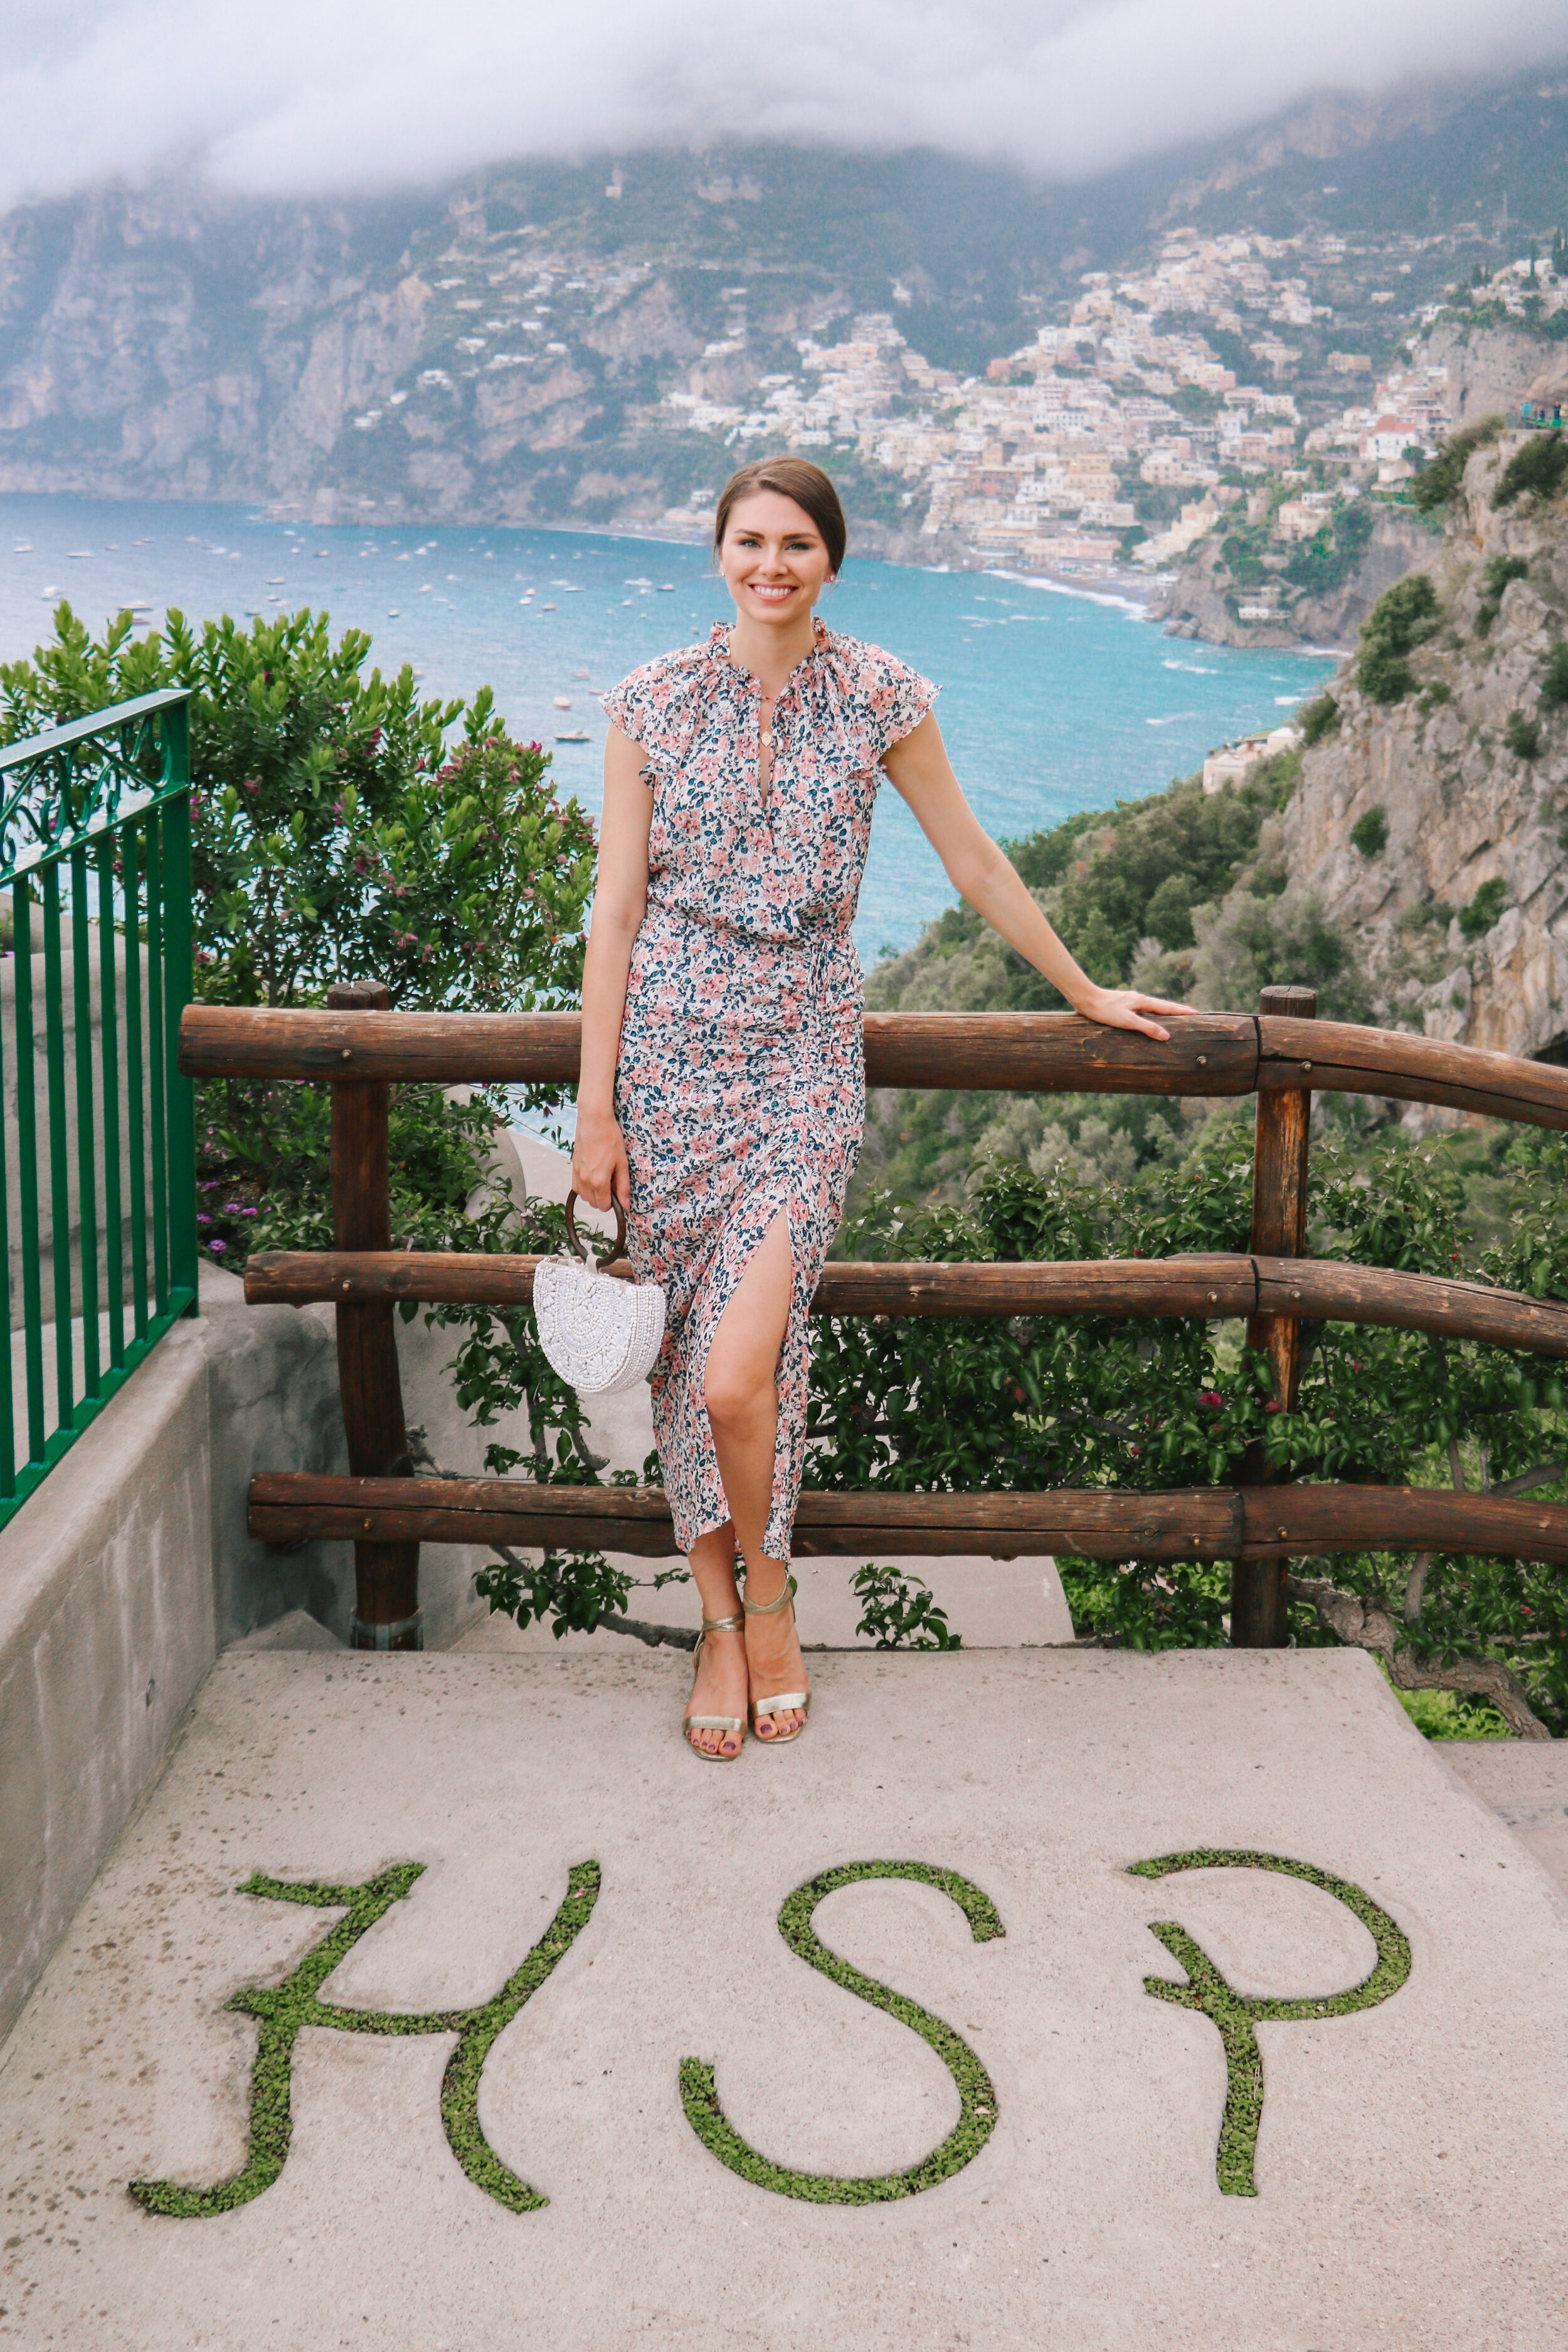 How Rent The Runway Changed The Way I Pack For Trips